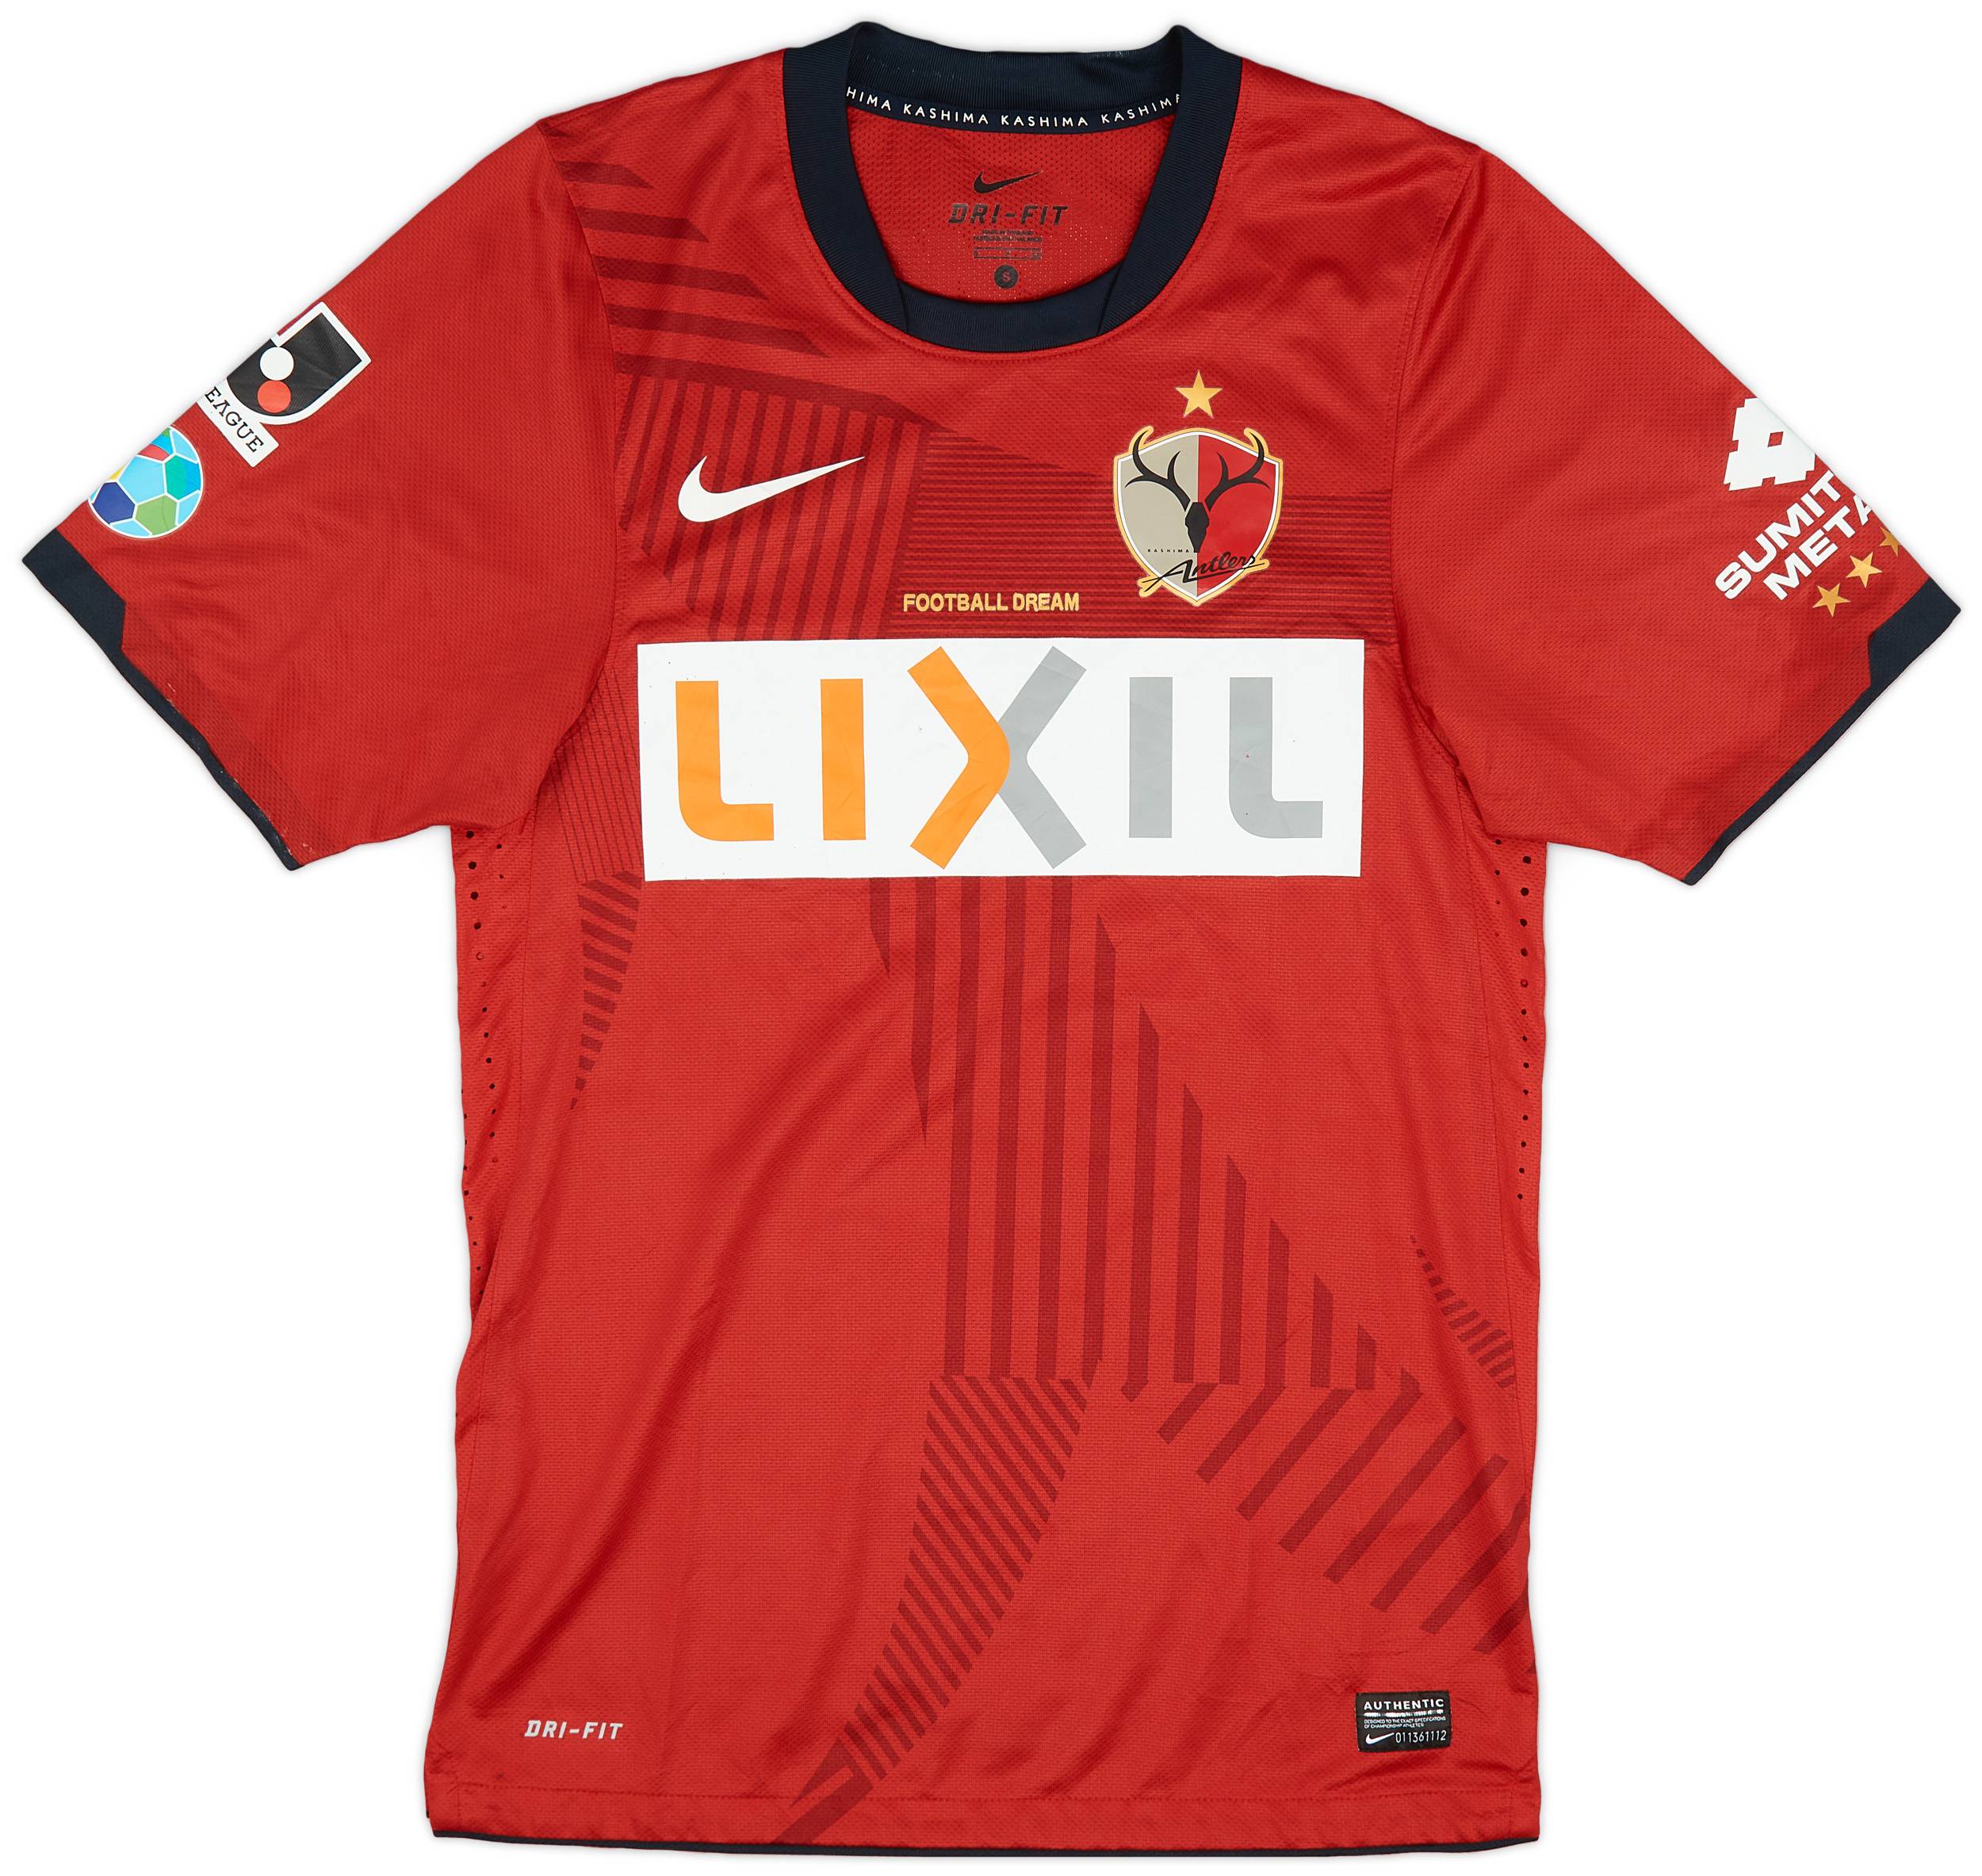 2011 Kashima Antlers Authentic Home Shirt - 7/10 - (S)